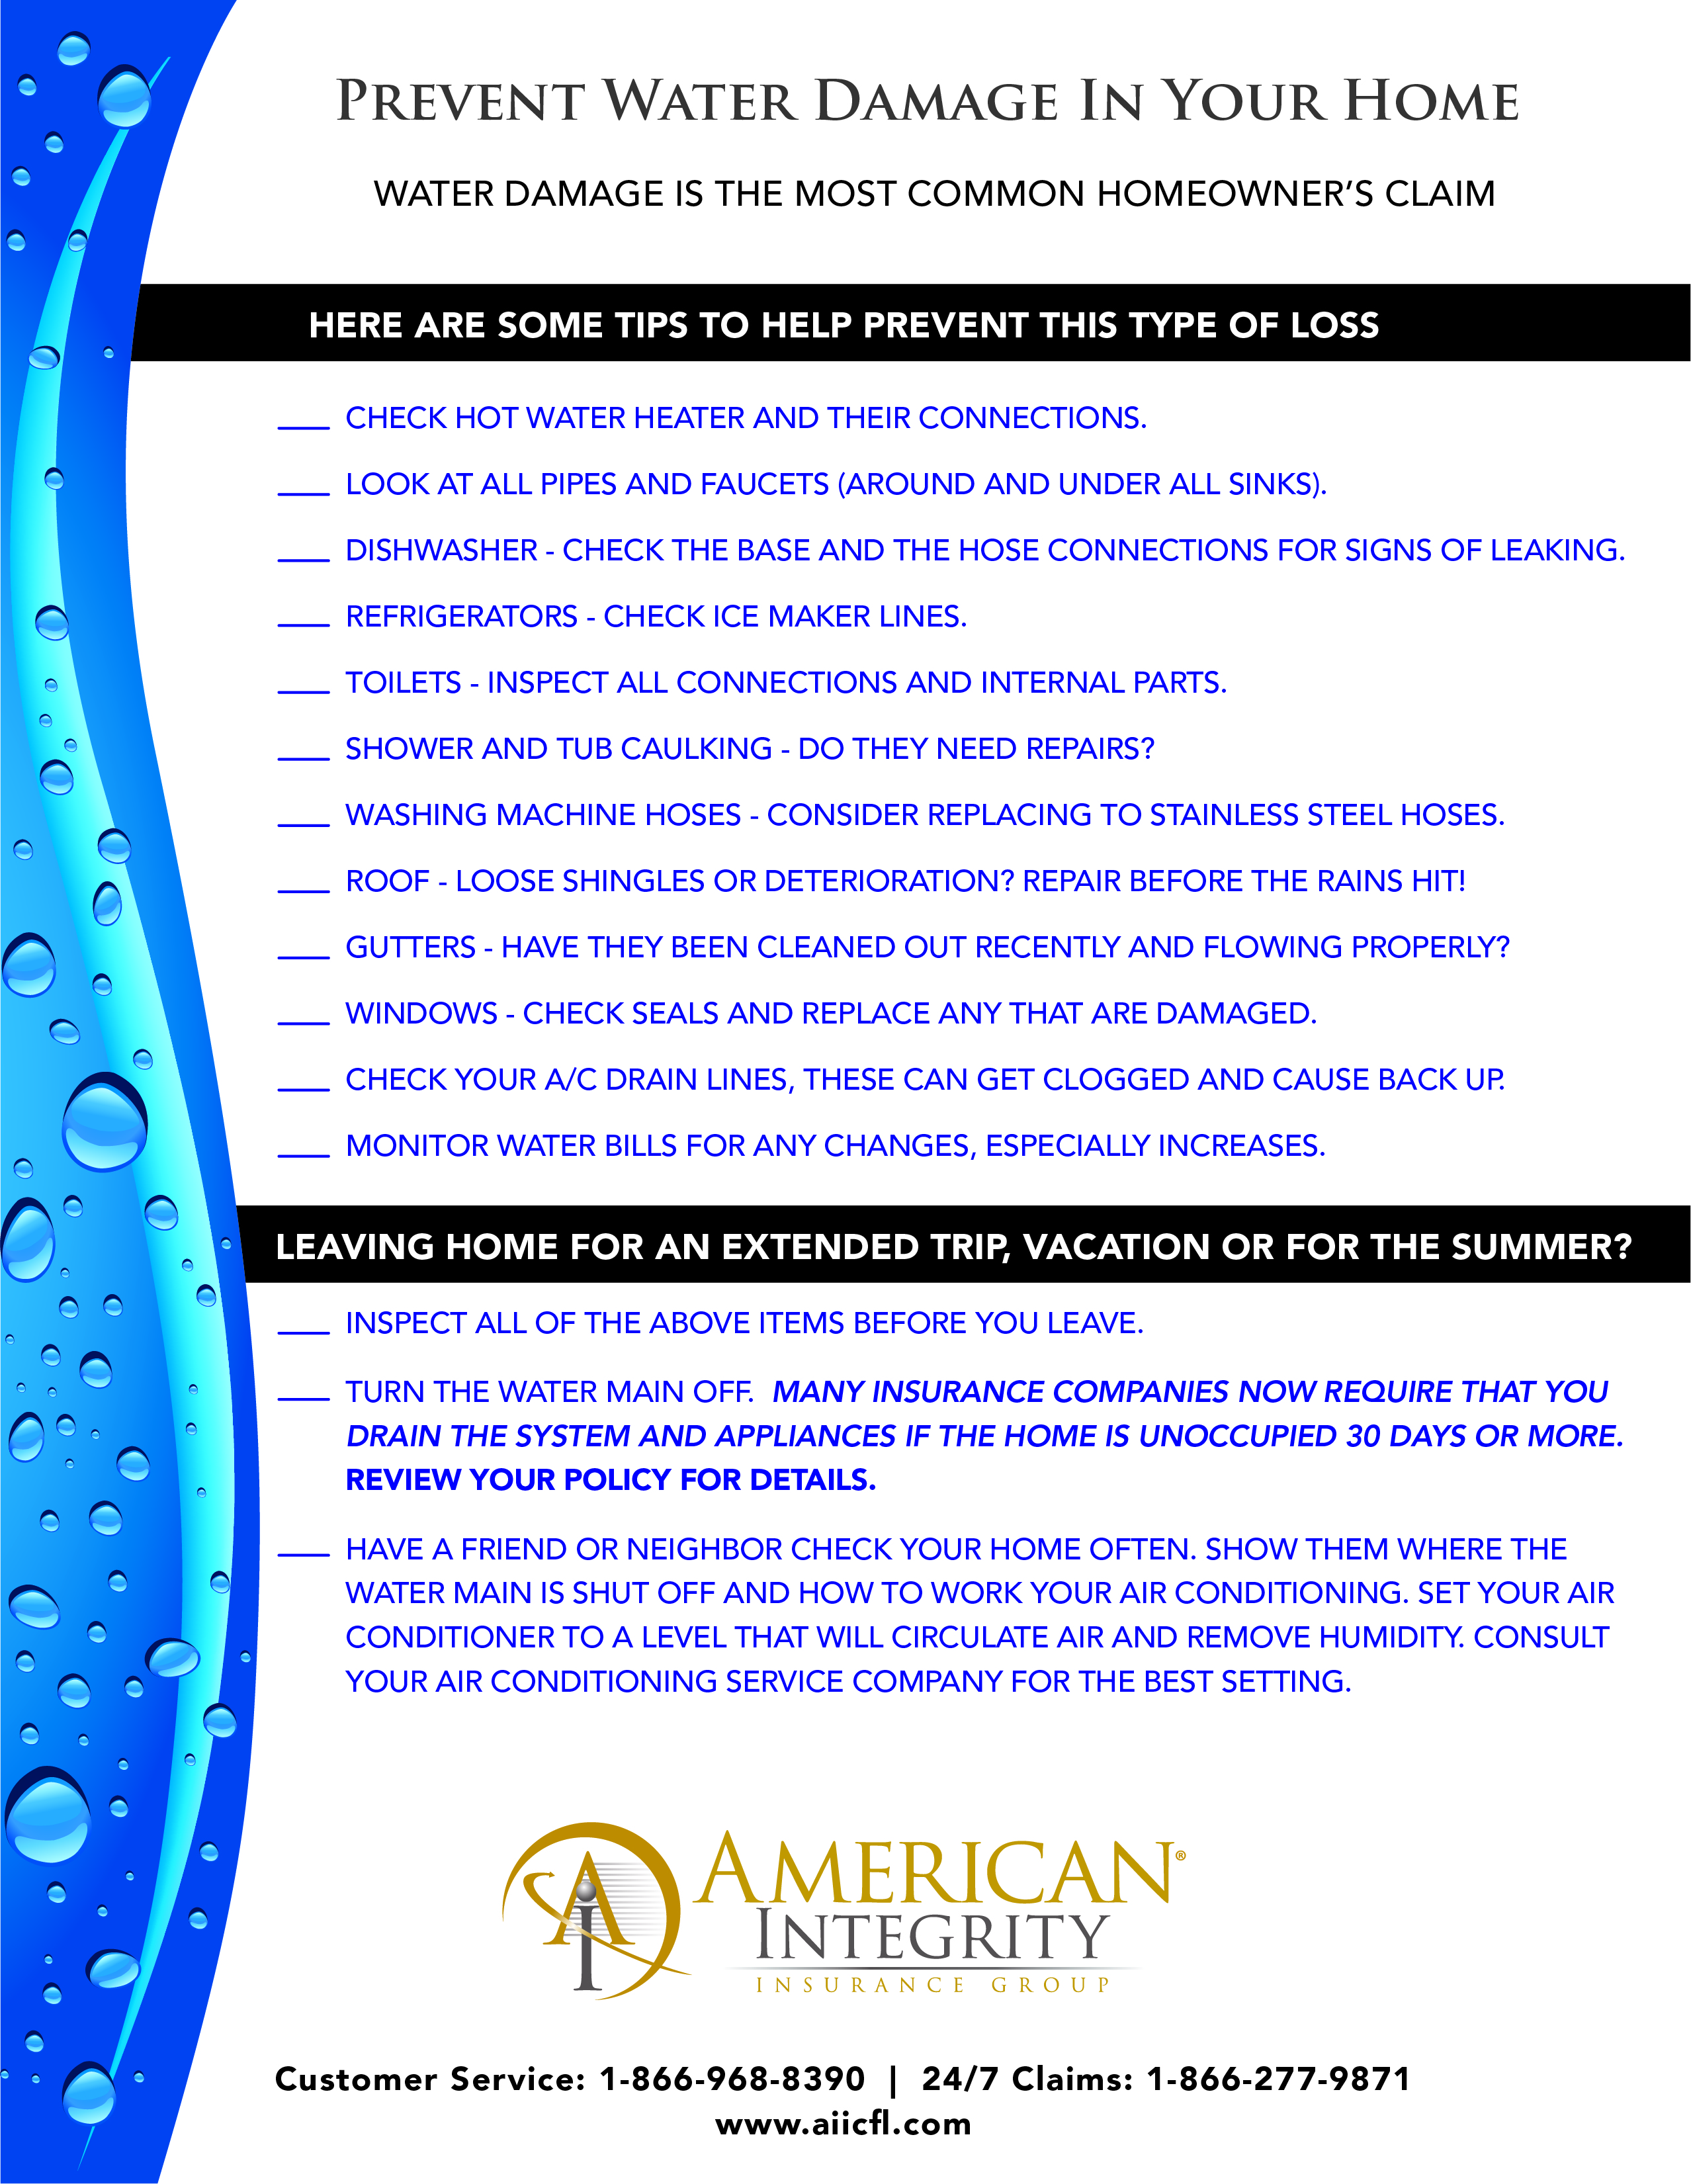 Prevent Water Damage American Integrity Insurance Group